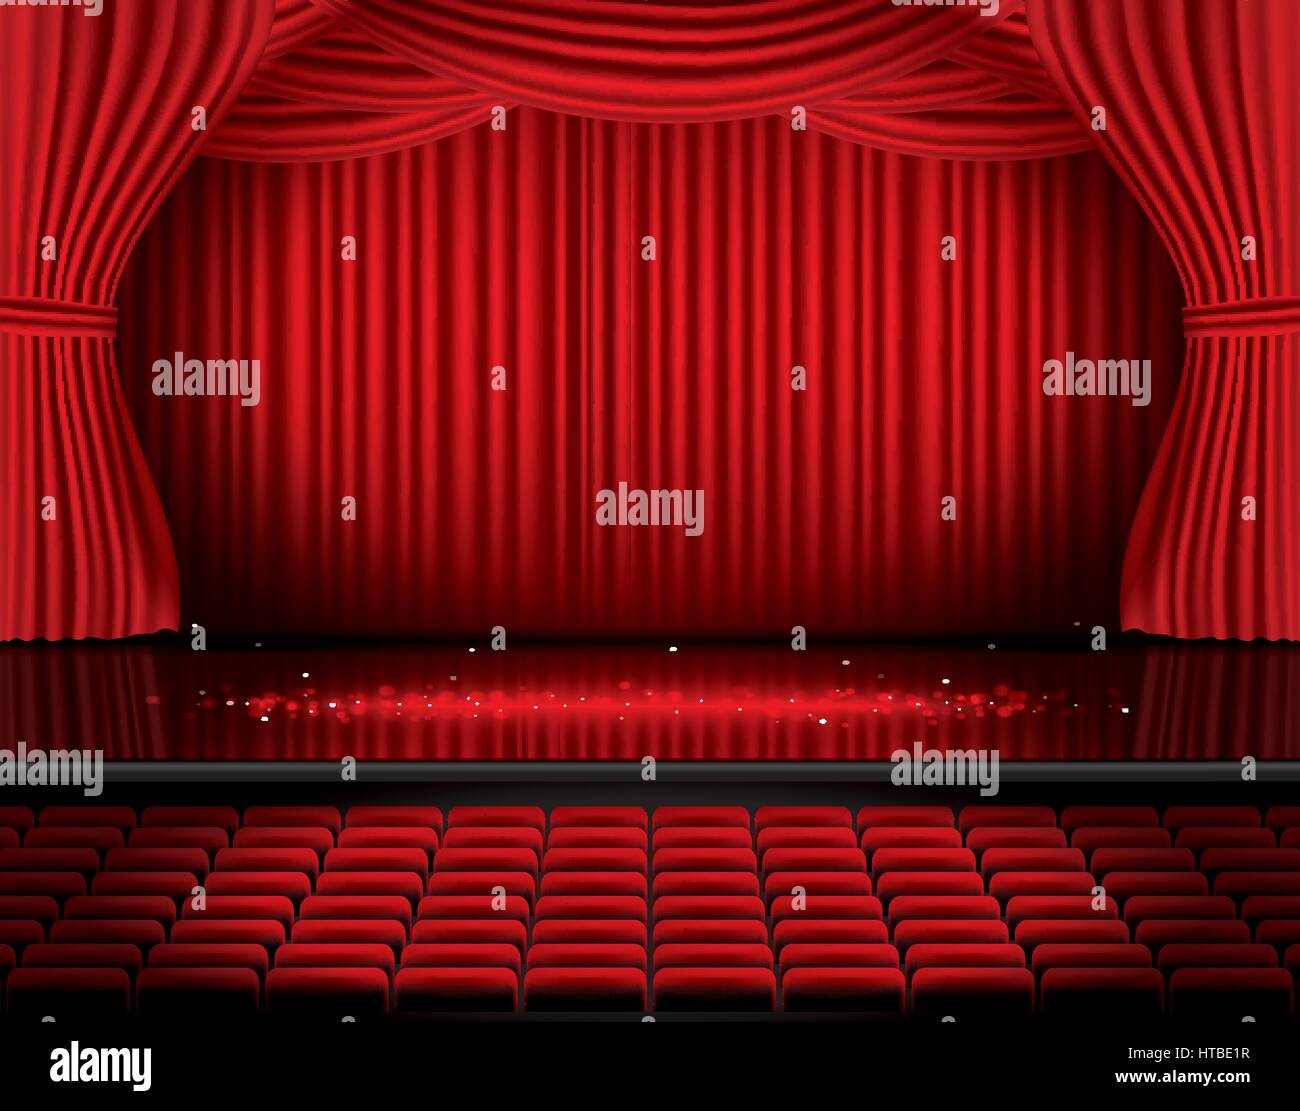 Red Stage Curtain with Seats and Copy Space. Vector illustration ...